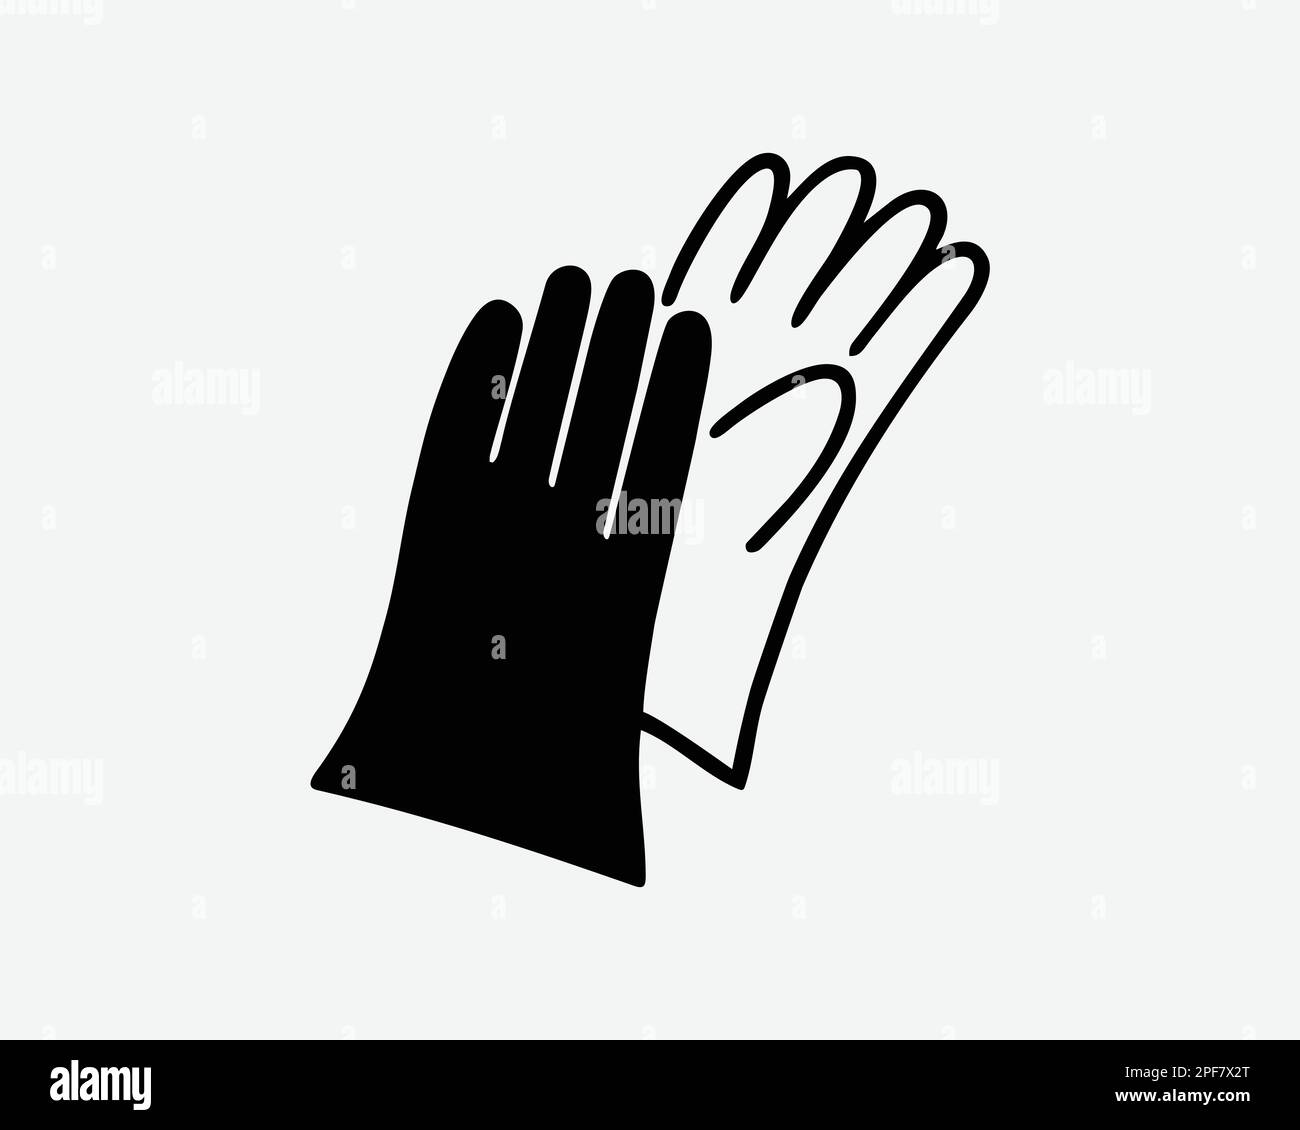 Gloves Icon Hand Glove Rubber Mitten Winter Medical Surgical Vector Black White Silhouette Symbol Sign Graphic Clipart Artwork Illustration Pictogram Stock Vector